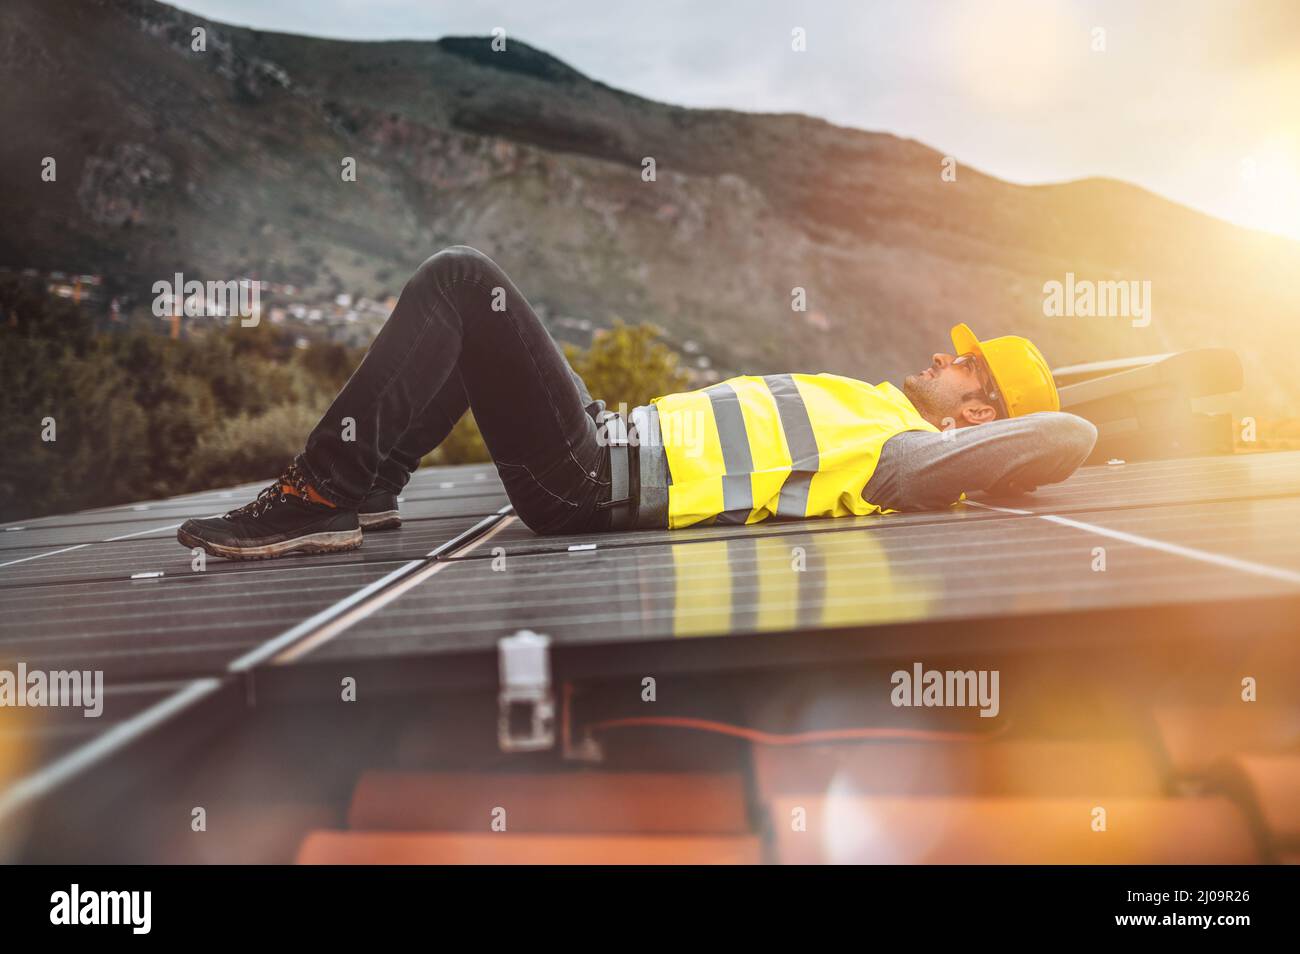 Workers relaxes above solar panel for electricity Stock Photo